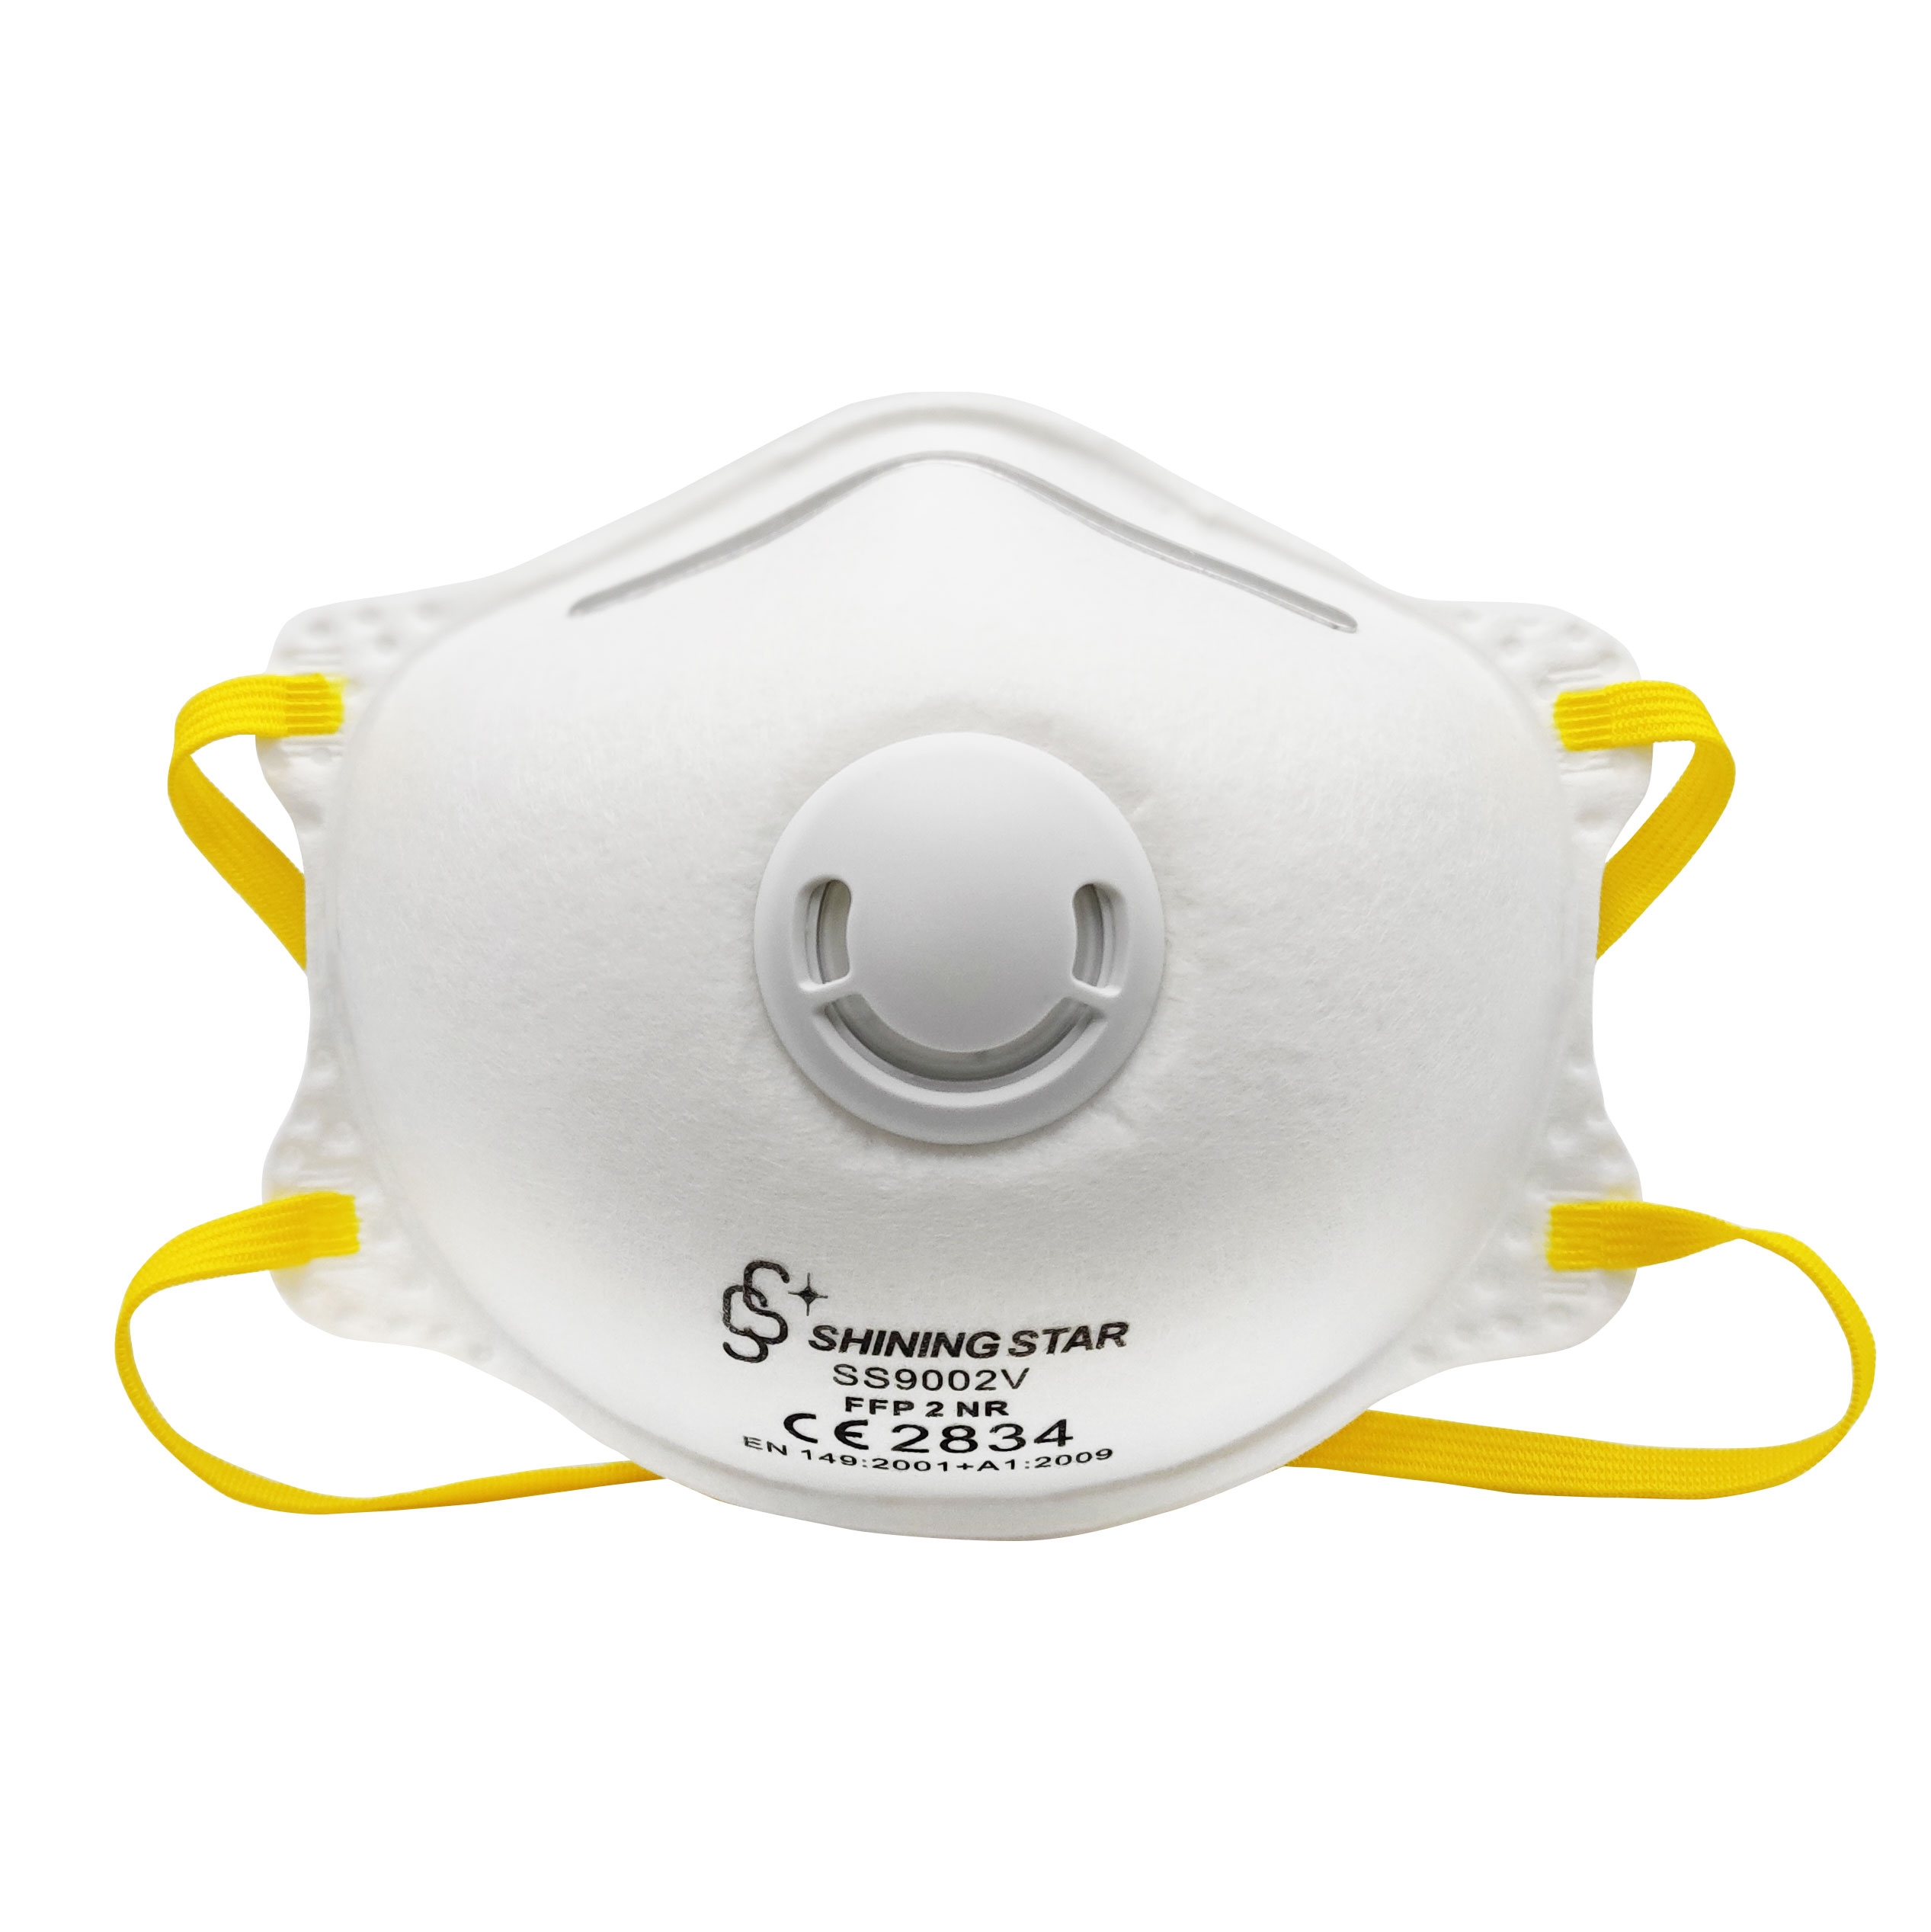 100% Original Ffp2 Flat Fold Respirator Without Valve -  SS9002V-FFP2 Disposable Particulate Respirator – Shining Star Featured Image